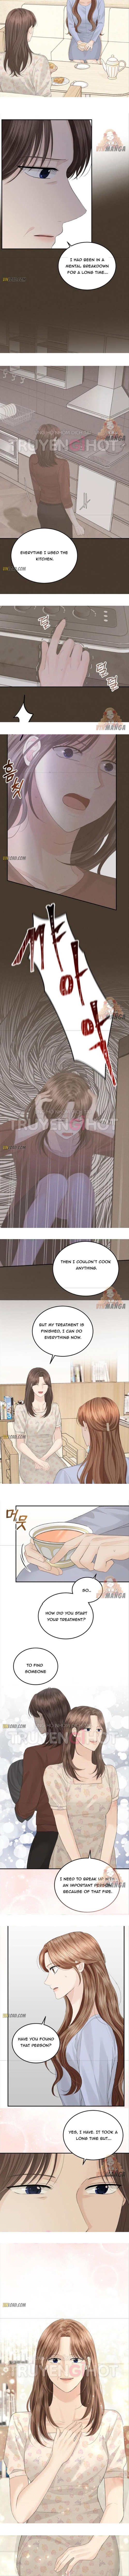 The Essence Of A Perfect Marriage Chapter 57 page 5 - Mangakakalot